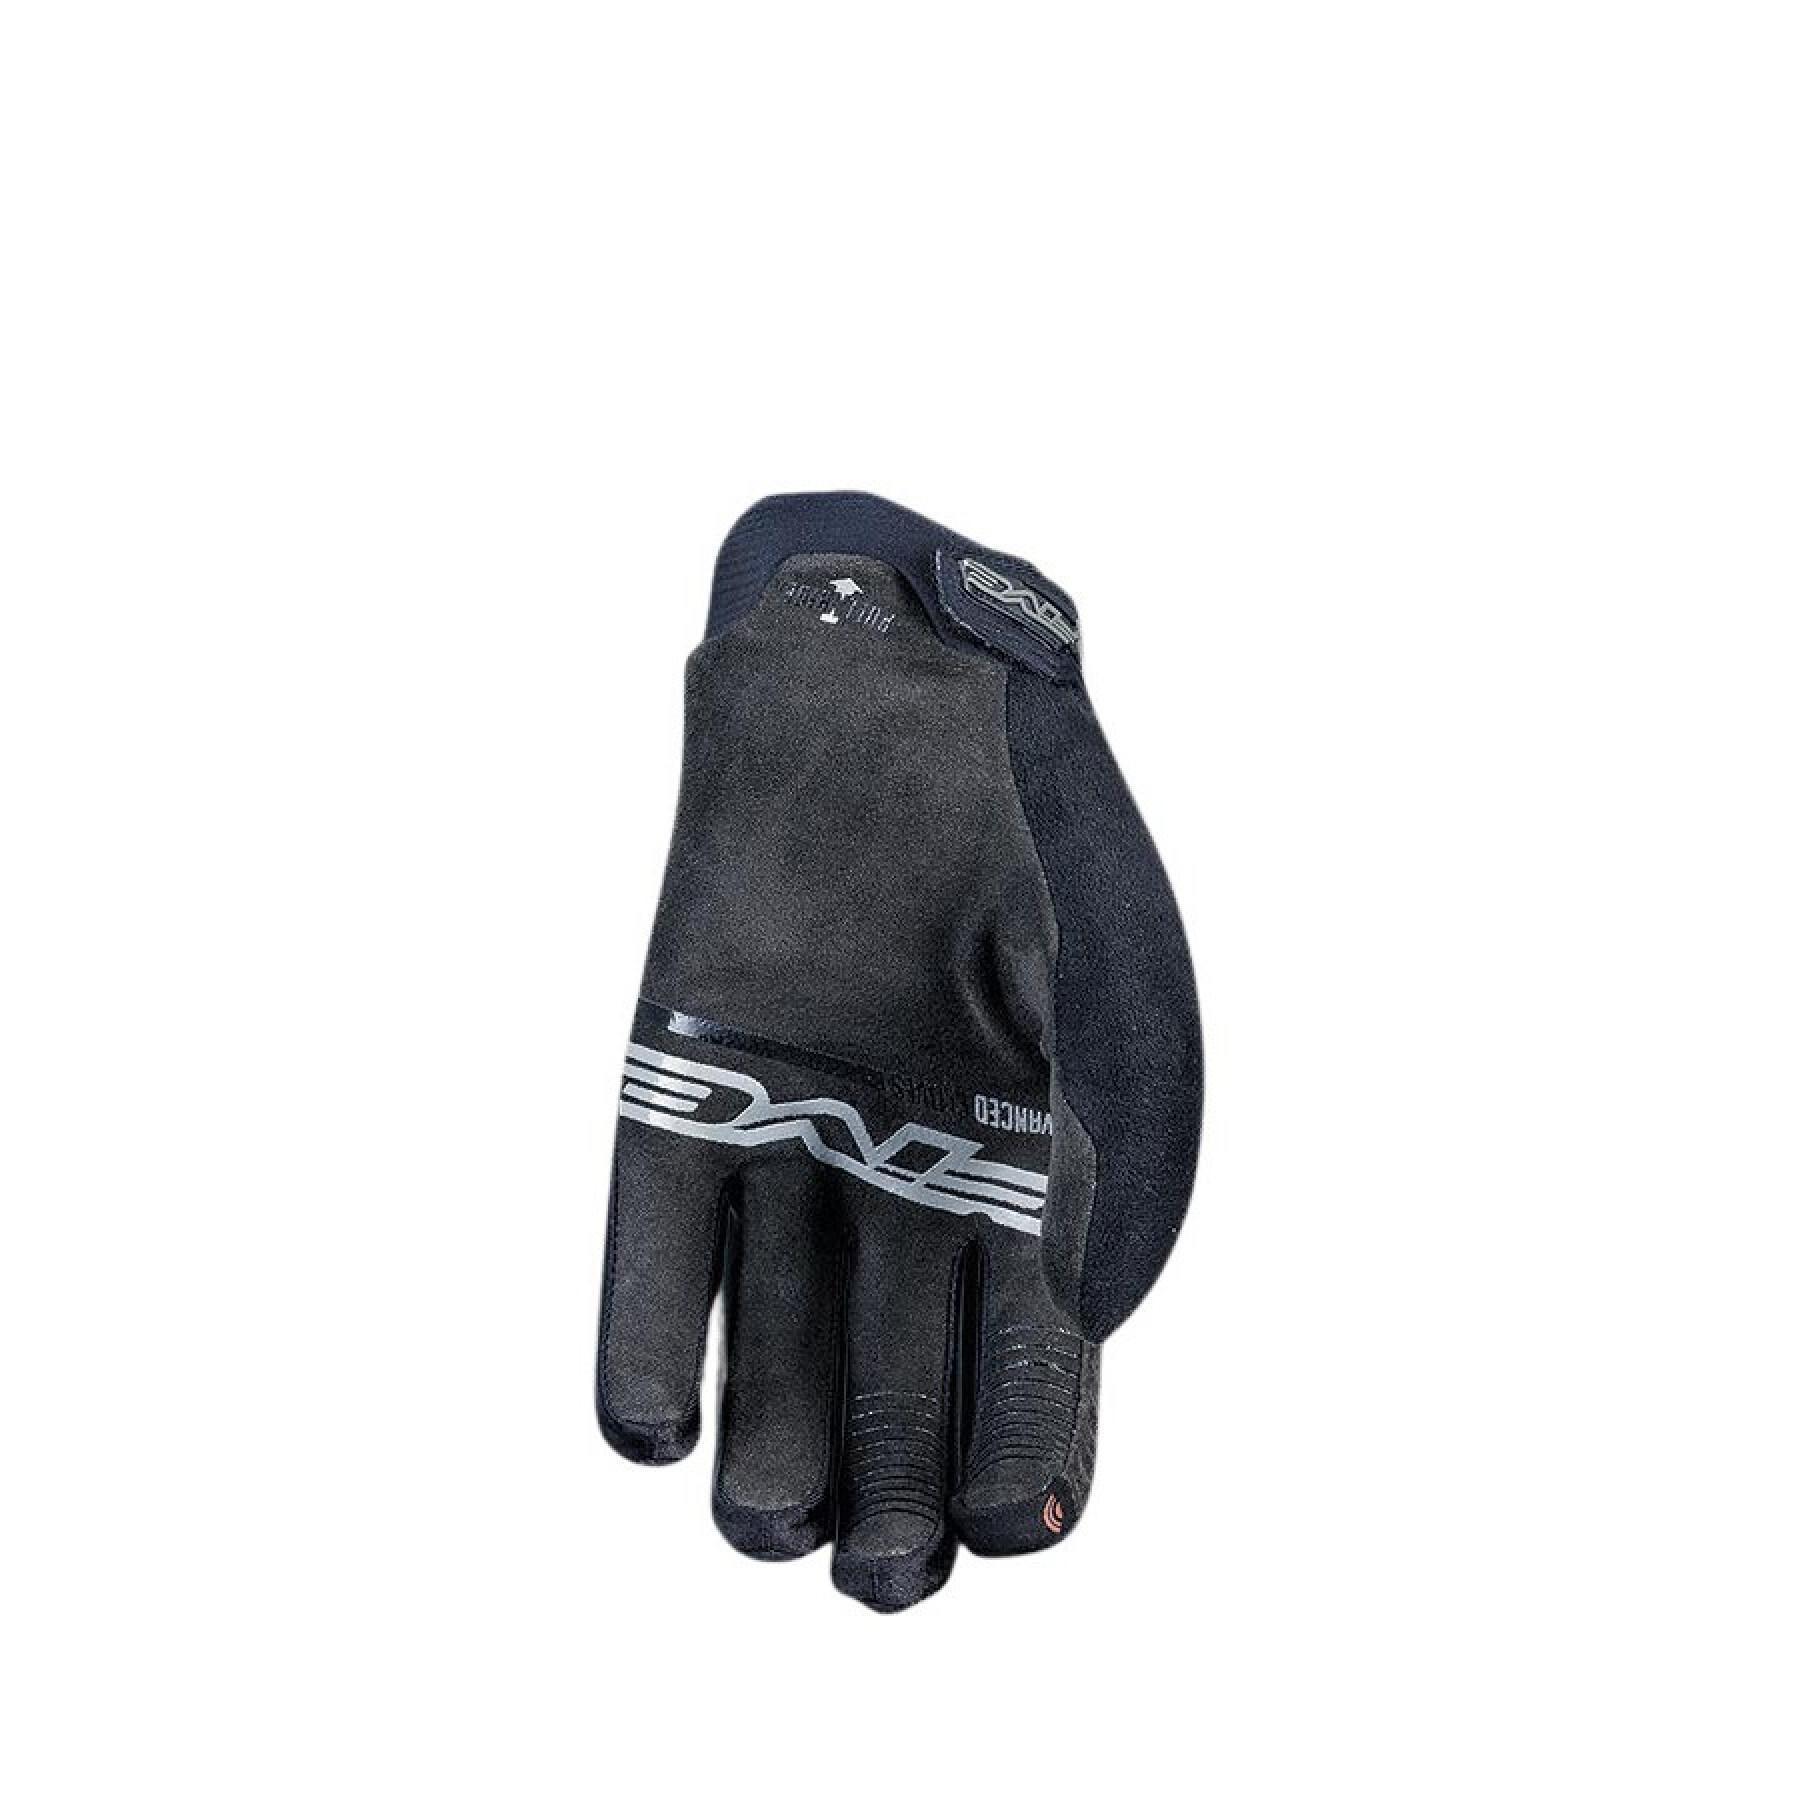 Training gloves Five NEO